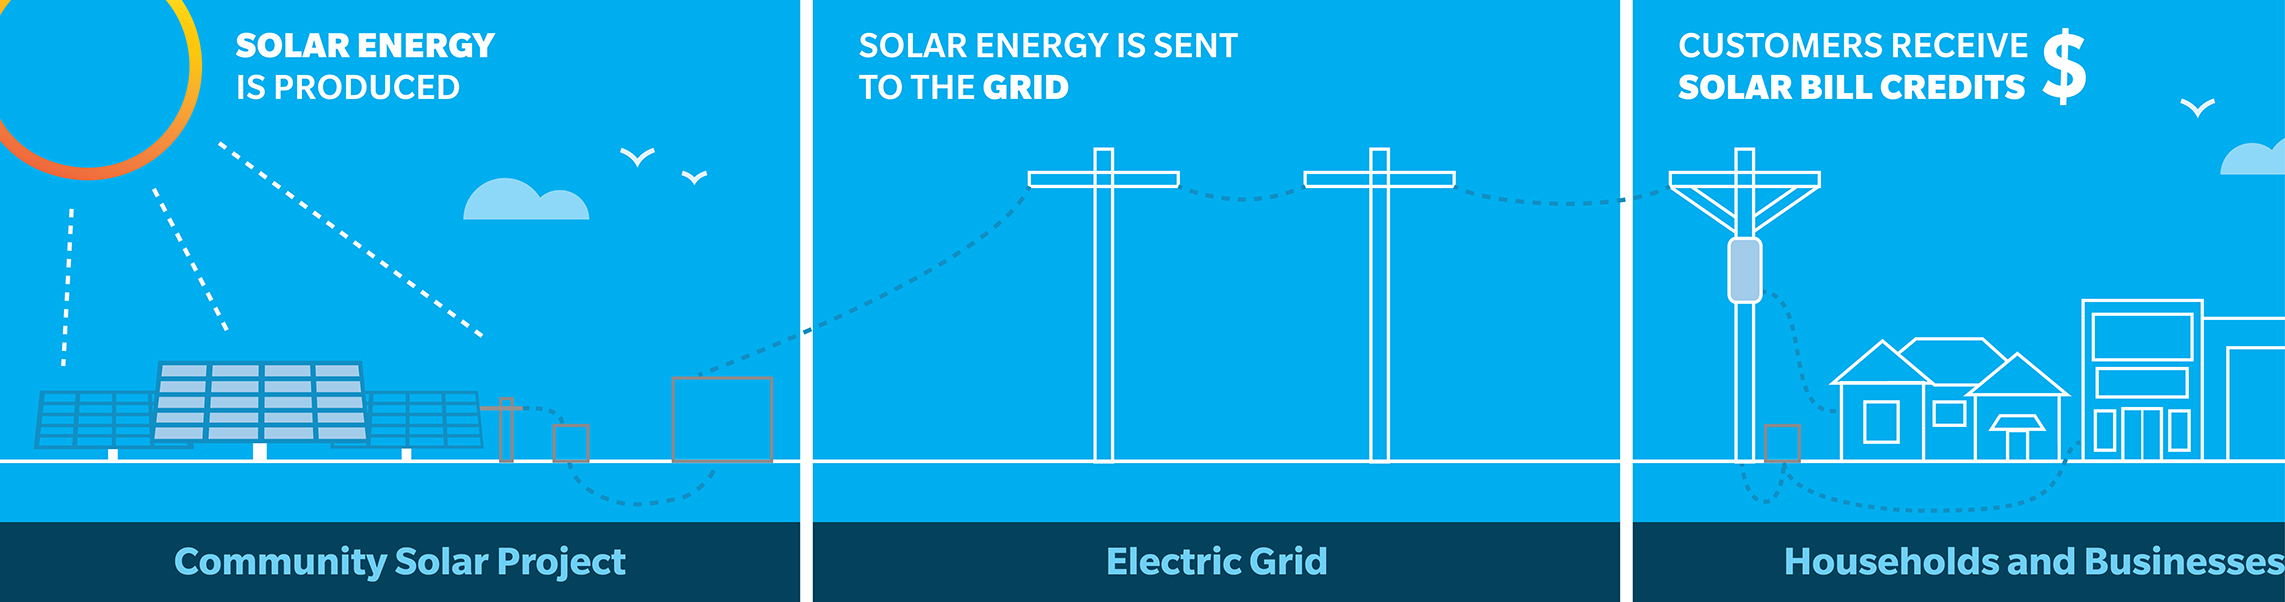 An infographic showing how solar energy is produced, sent to the grid, and then customers receive a bill credit